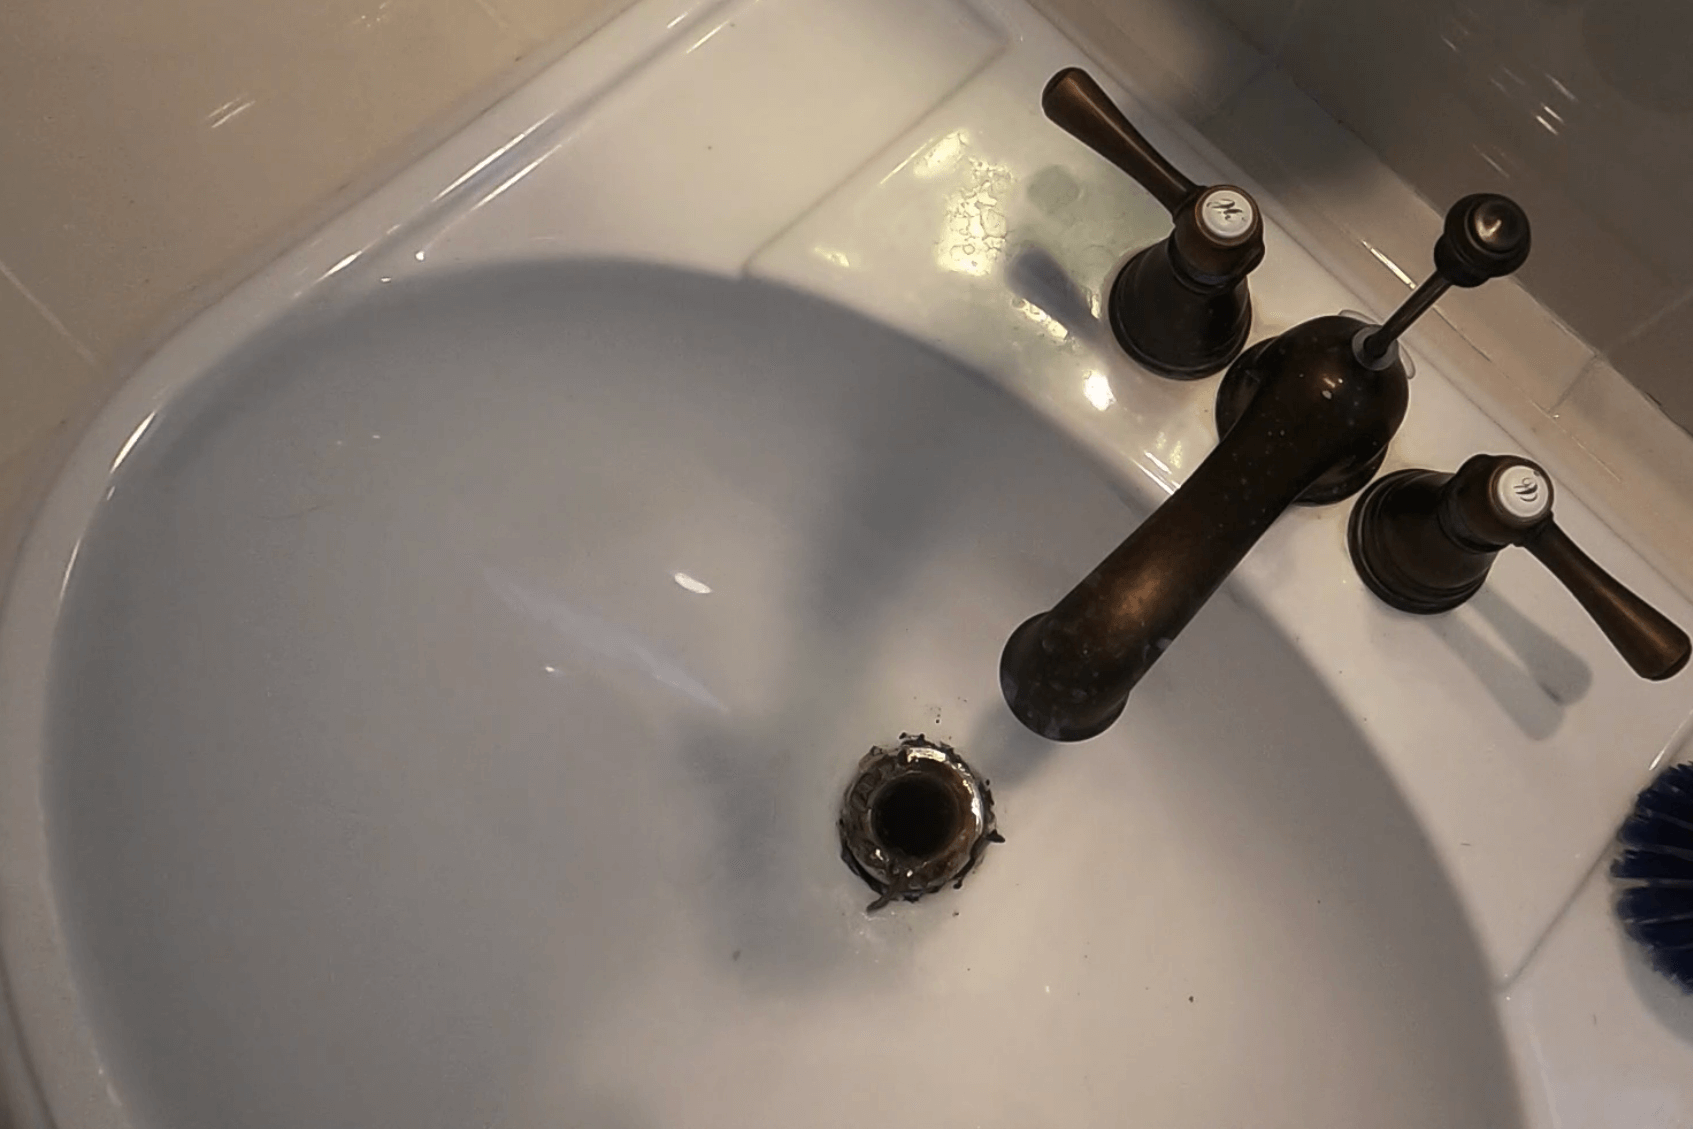 Clearing a Slow Drain - Z PLUMBERZ